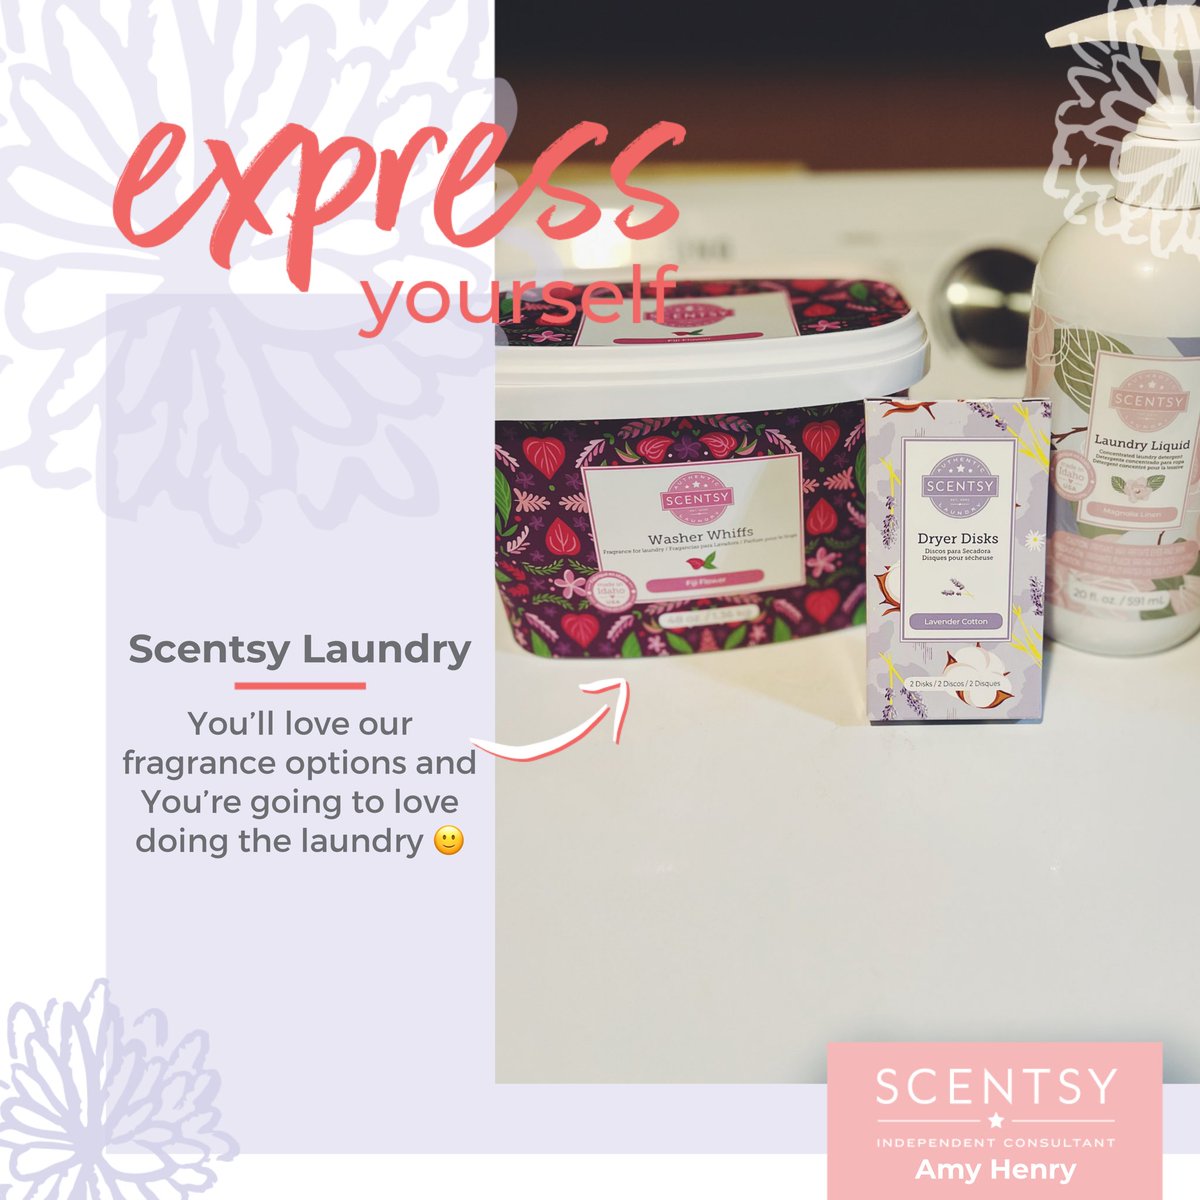 I’m a Certified Independent Consultant For Scentsy #scentsylife #ScentsyConsultant #ScentsyLaundry